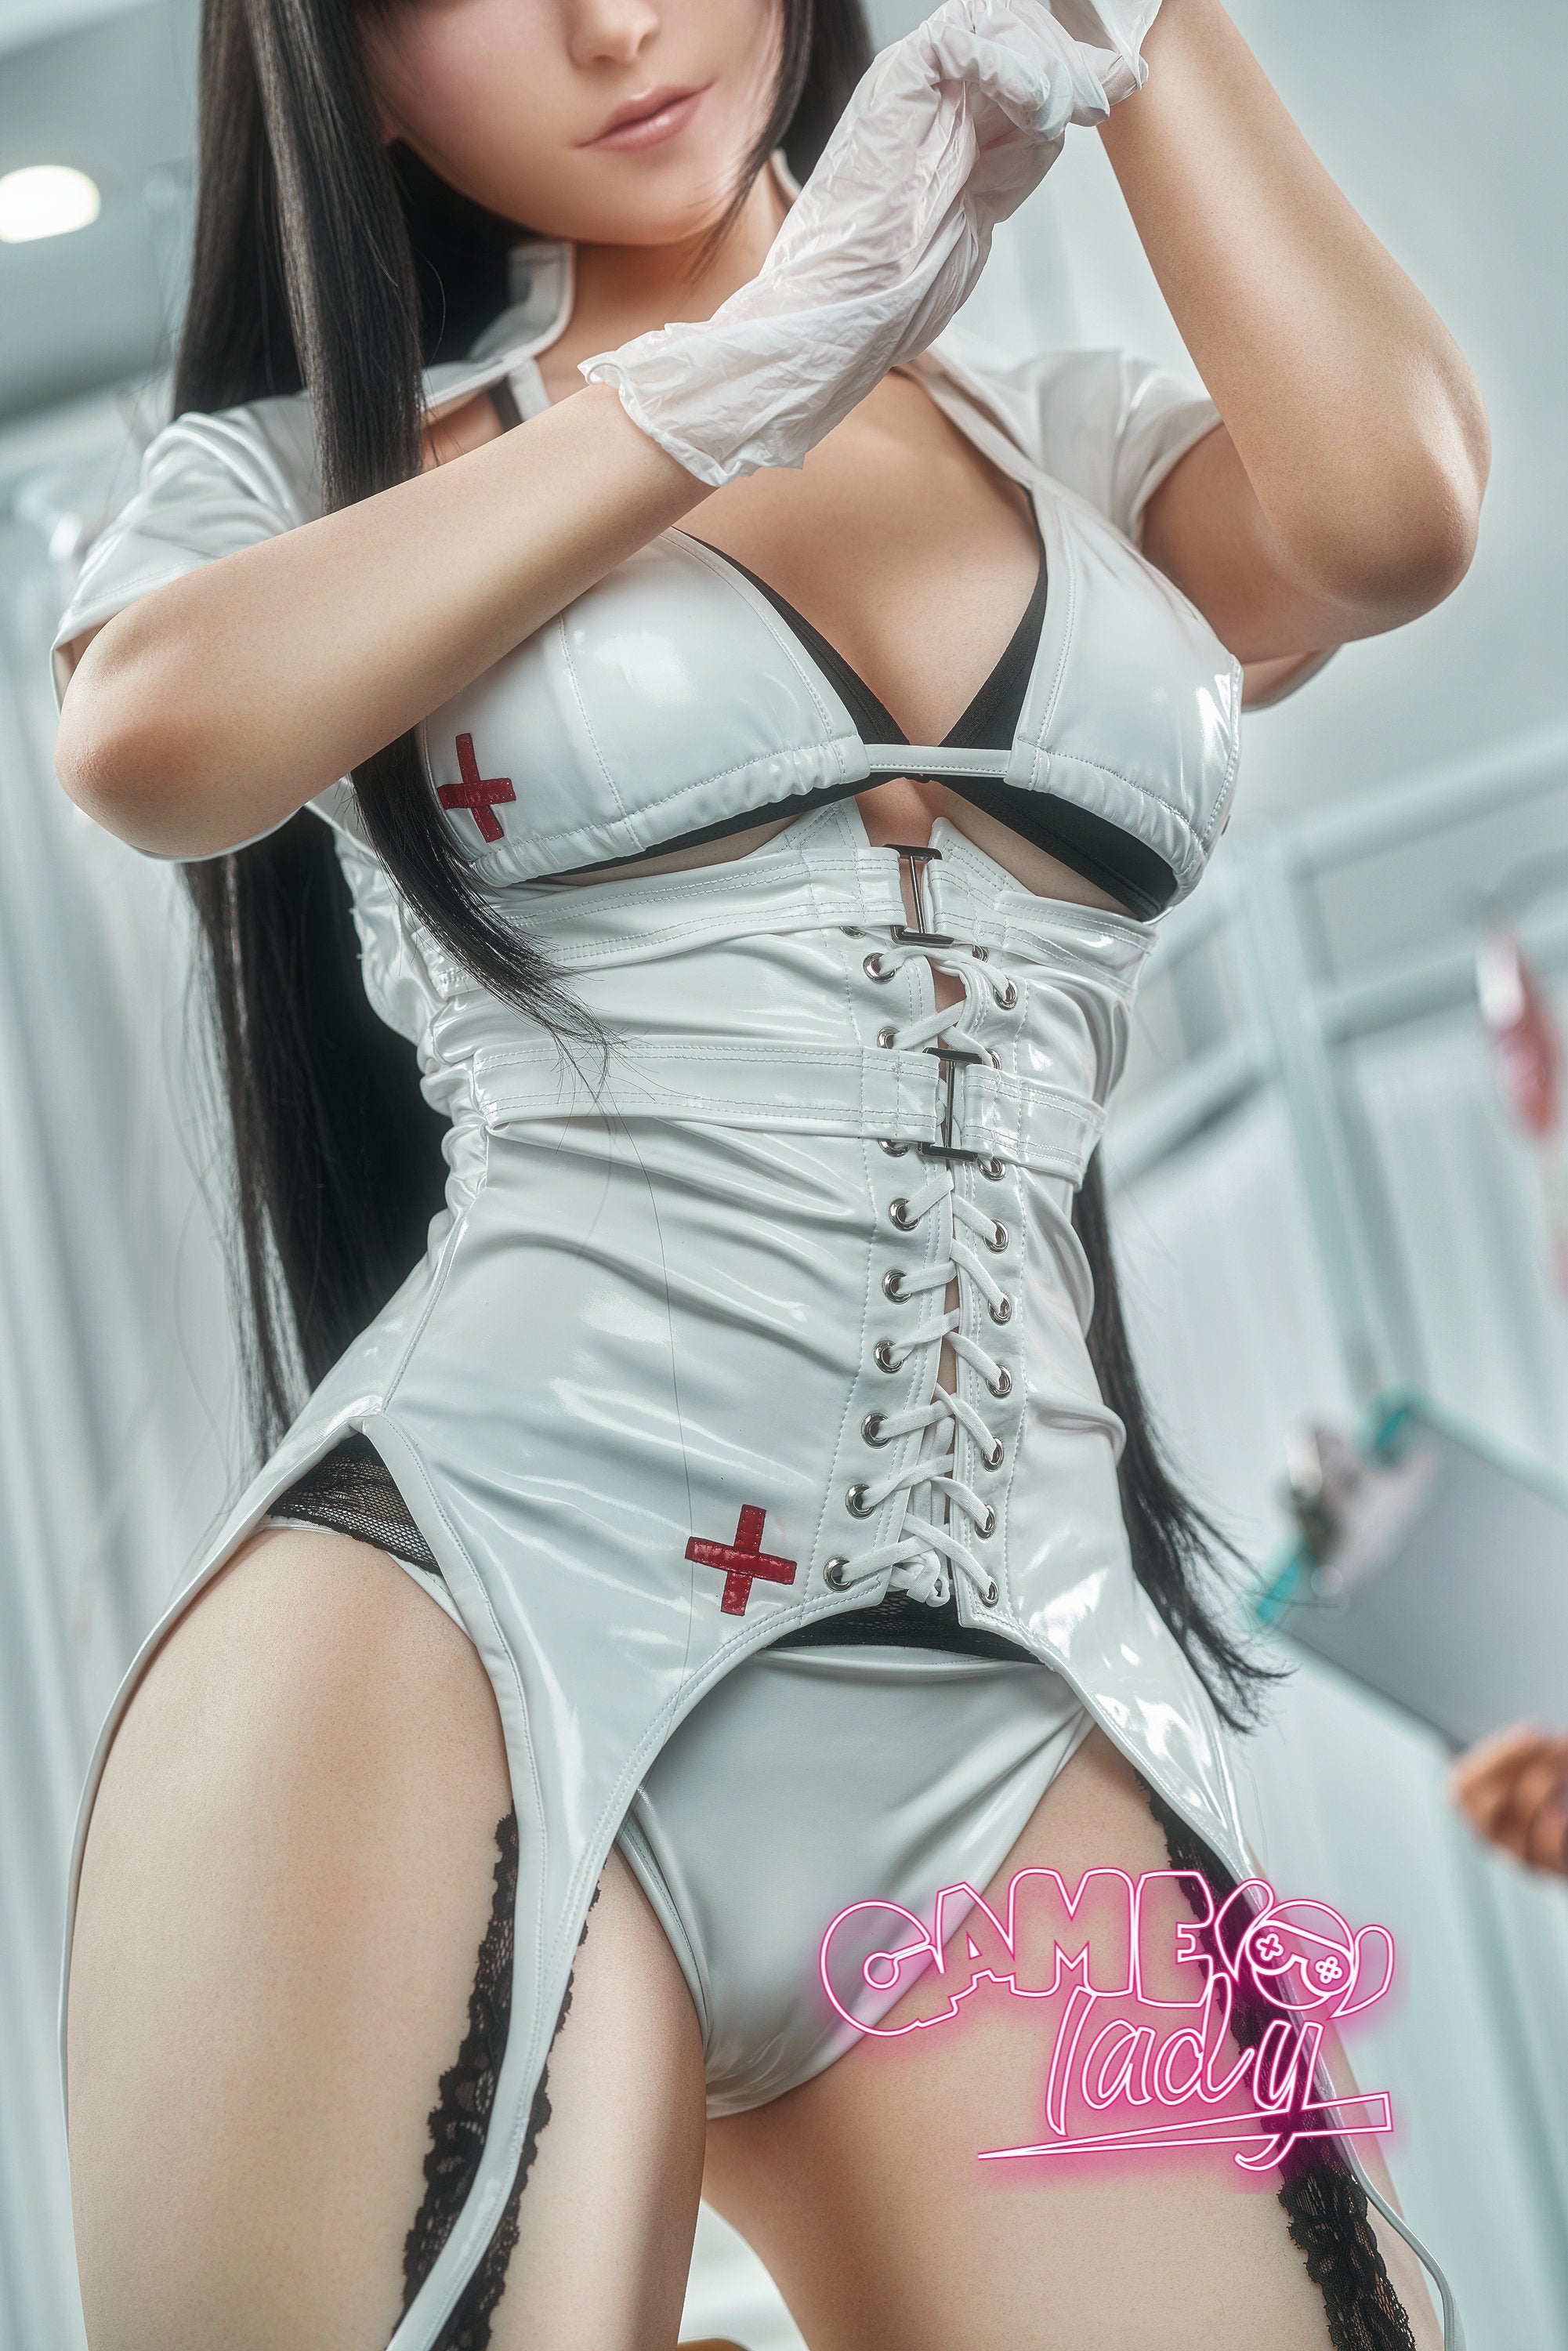 Game Lady 168 cm Silicone - Tifa V1 | Buy Sex Dolls at DOLLS ACTUALLY